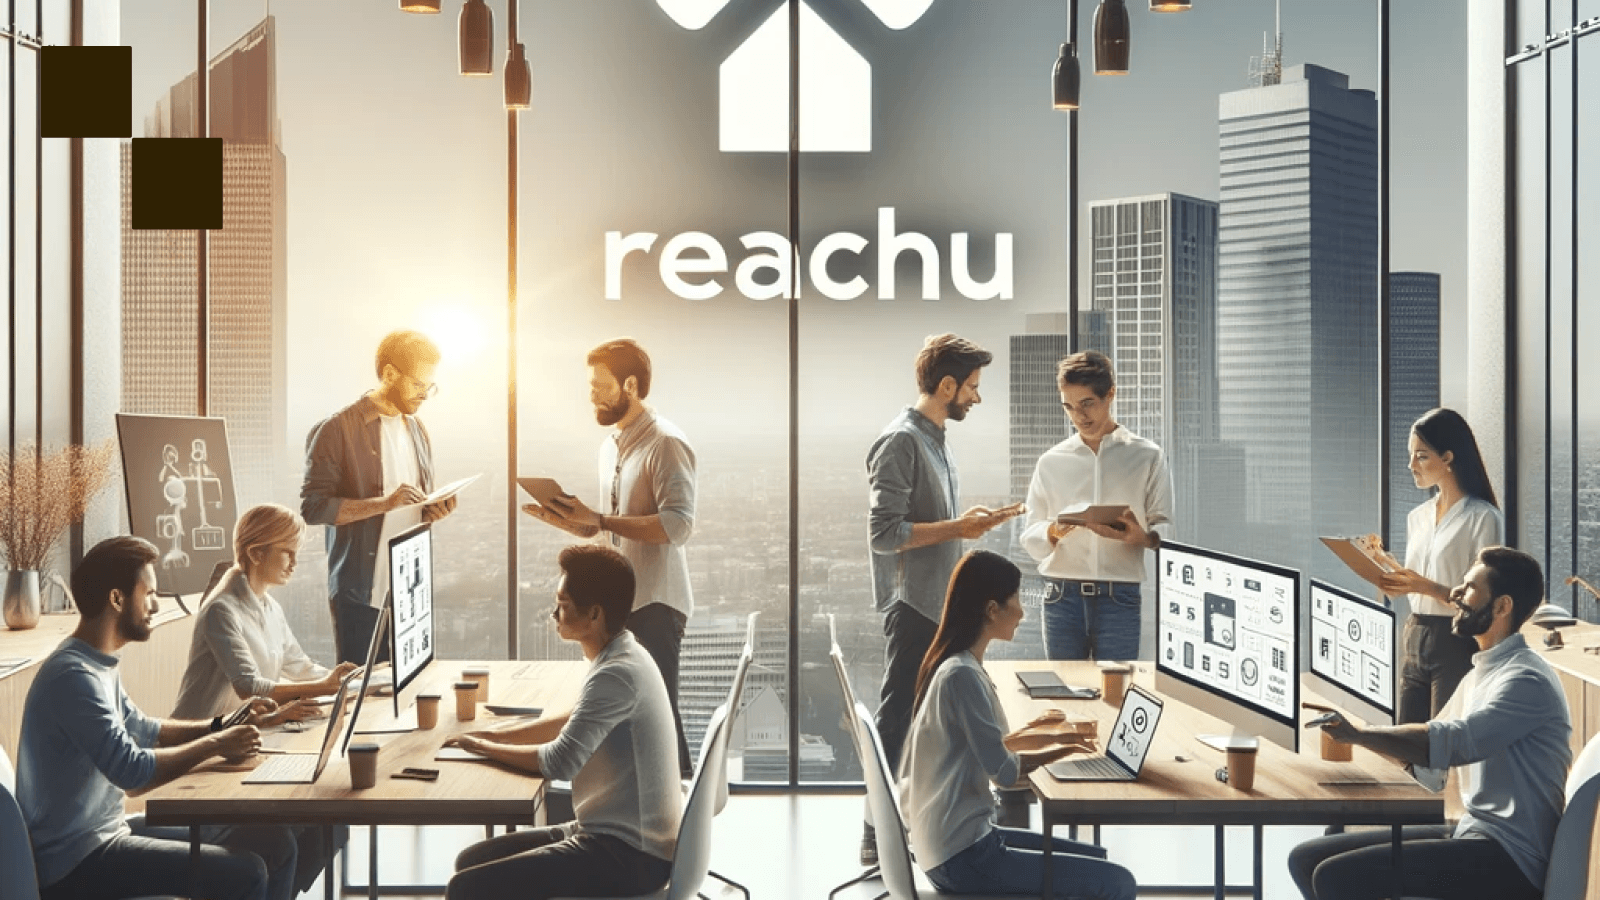 people collaborating on techniqual projects under reachu